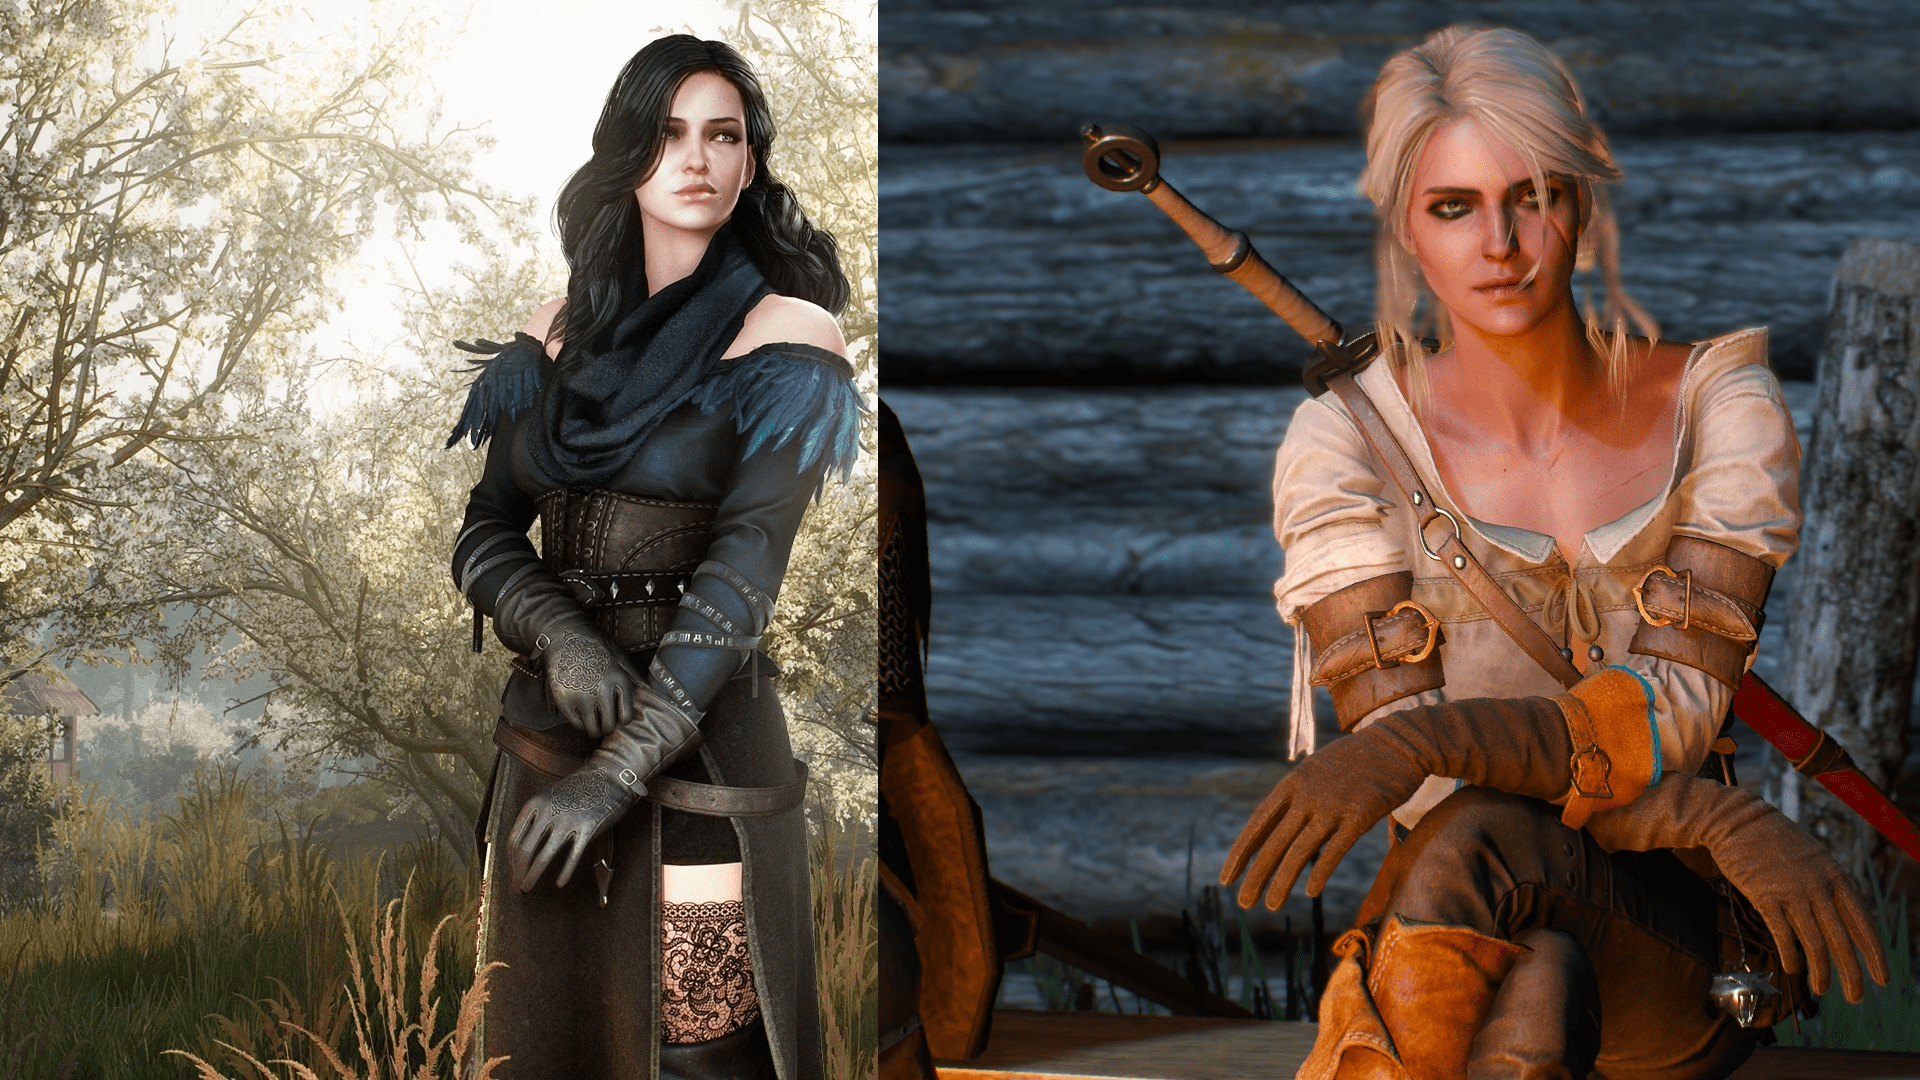 Freya Allan and Anya Chalotra Cast as Ciri and Yennefer Respectively